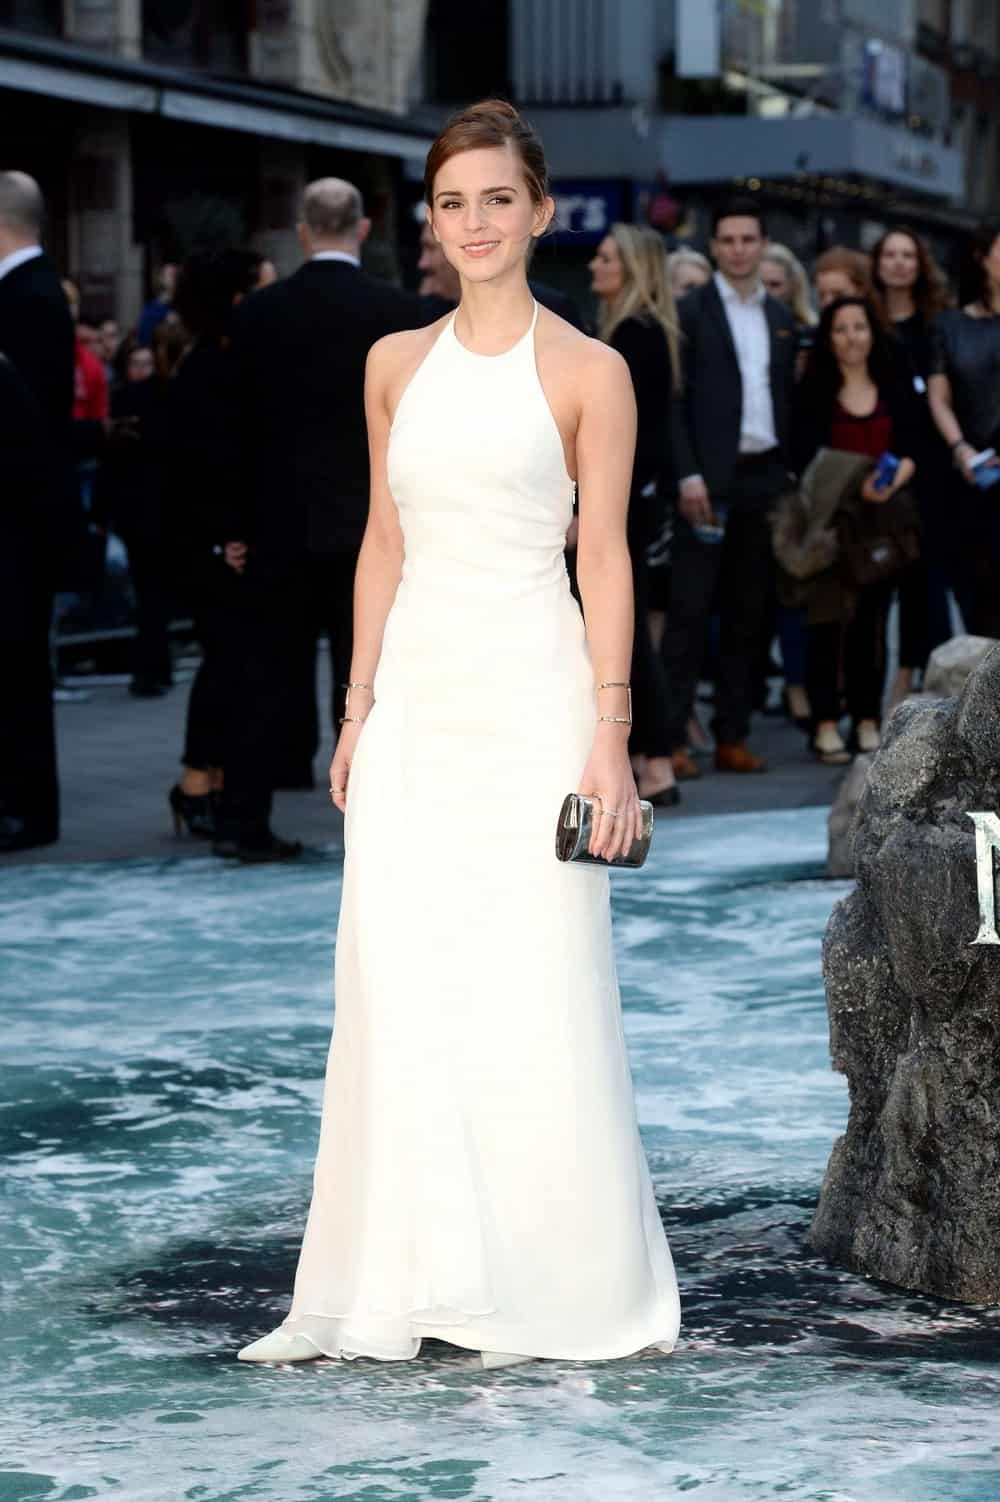 Emma Watson Wears a Dress with a Thigh-high Slit at the Premiere of "Noah"